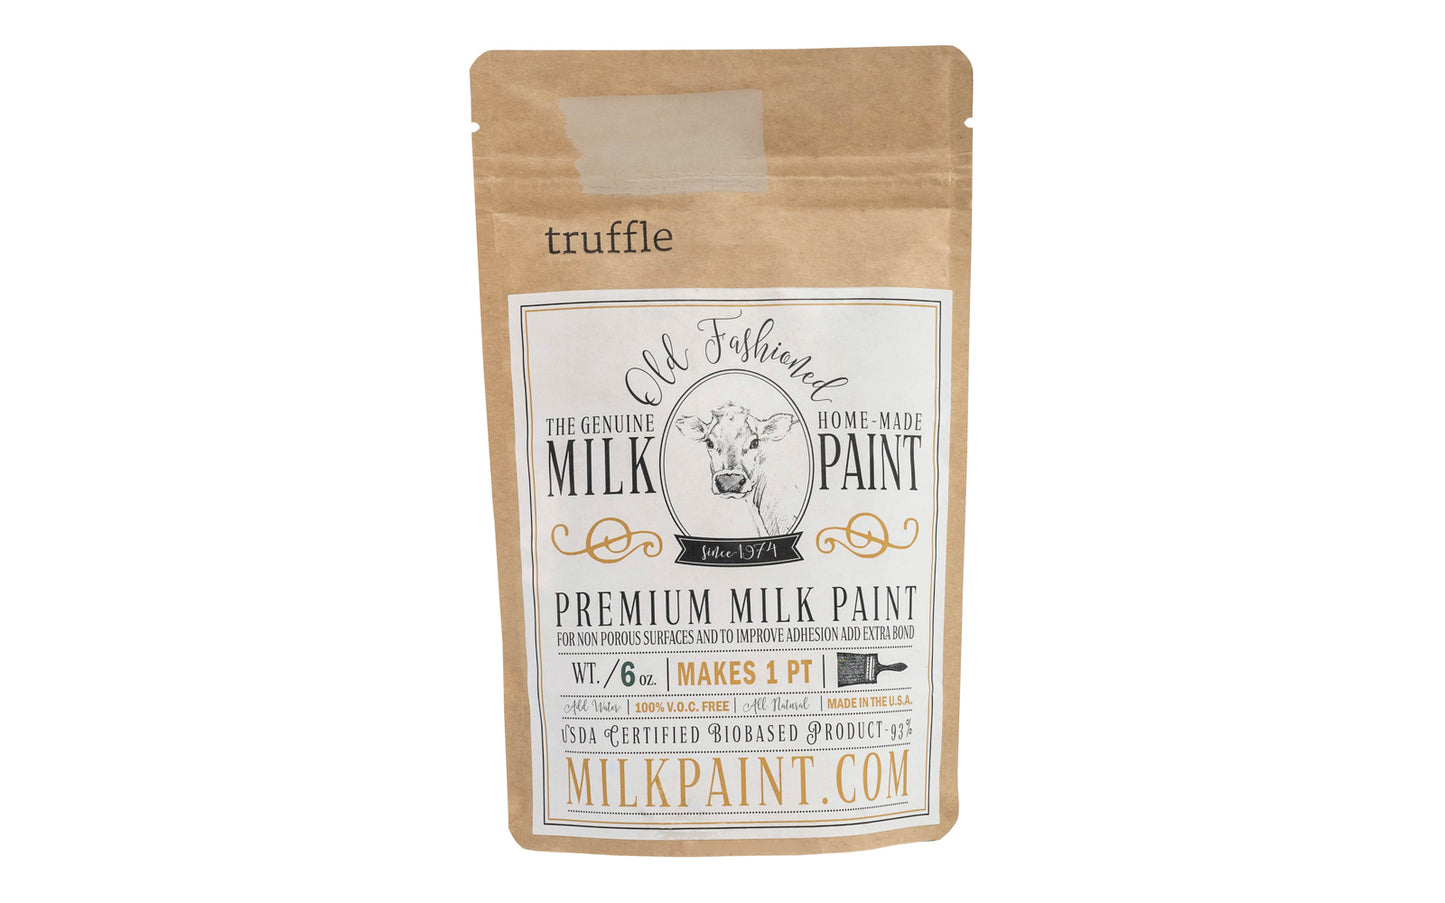 This Milk Paint color is "Truffle" - Dark cream with light brown undertones. Comes in a powder form, you can control how thick/thin you mix the paint. Use it as you would regular paint, thinner for a wash/stain or thicker to create texture. Environmentally safe, non-toxic & is food safe. 100% VOC free. Powder Paint